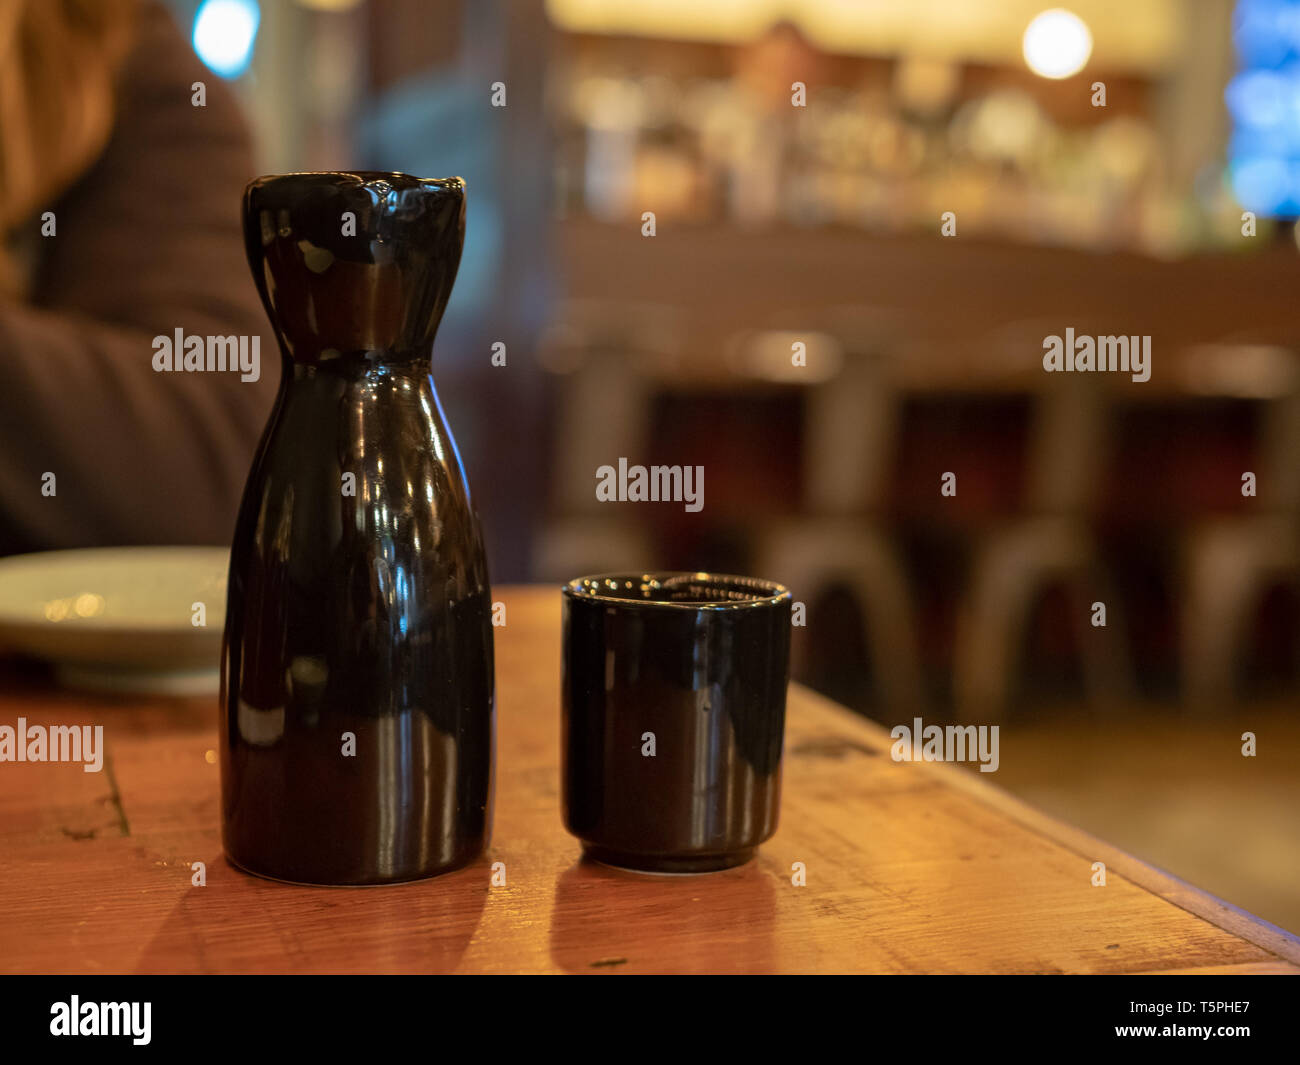 Black sake bottle and glass sitting on table at dining area Stock Photo